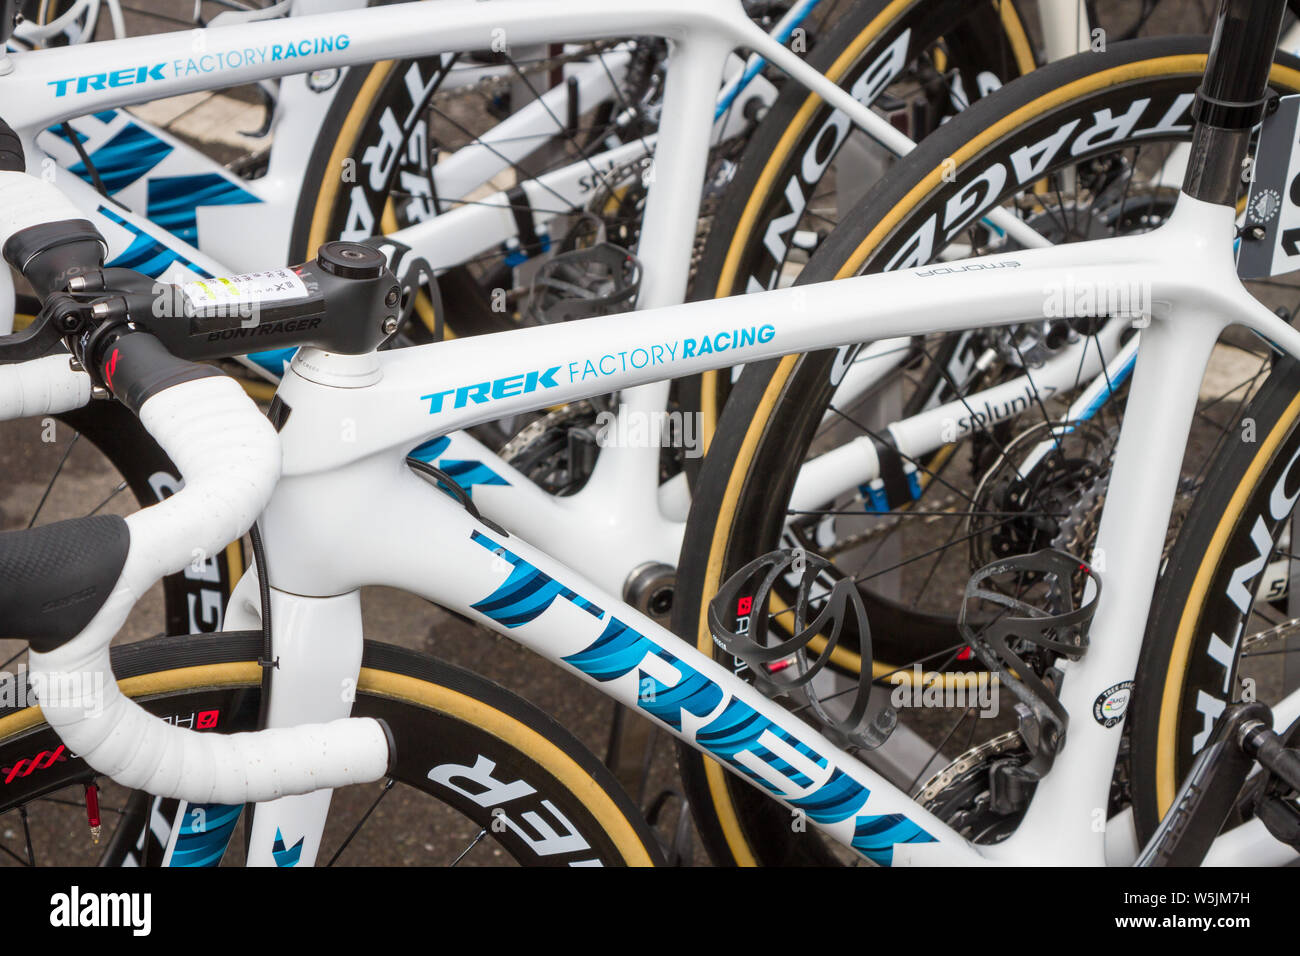 Close-up of road racing bikes from the Trek Factory Racing team at the OVO Energy women's tour Stock Photo